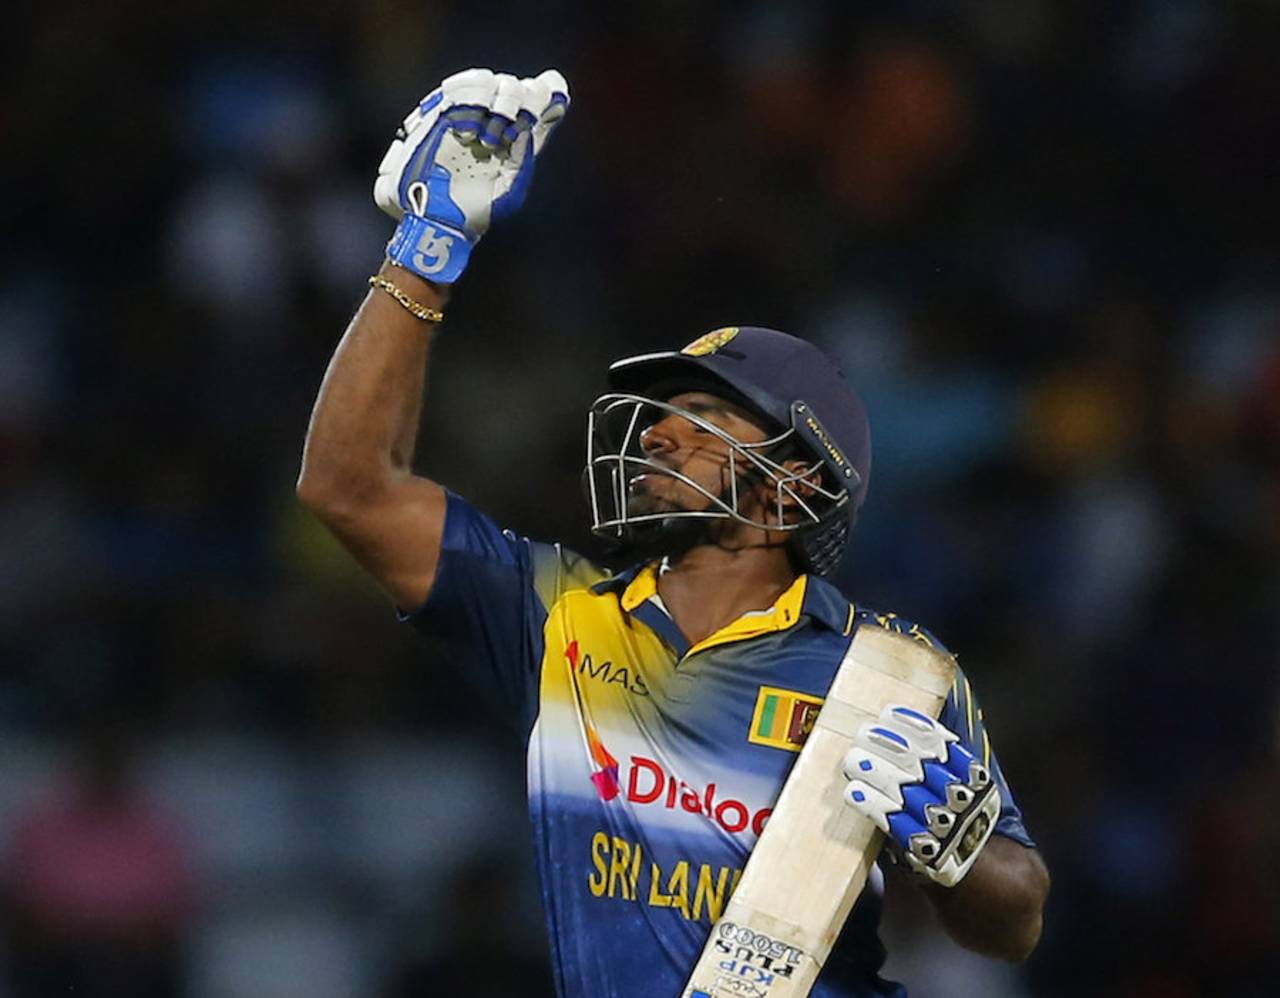 Kusal Perera had the full support of SLC President Thilanga Sumathipala after he was provisionally suspended by the ICC in December 2015&nbsp;&nbsp;&bull;&nbsp;&nbsp;Associated Press